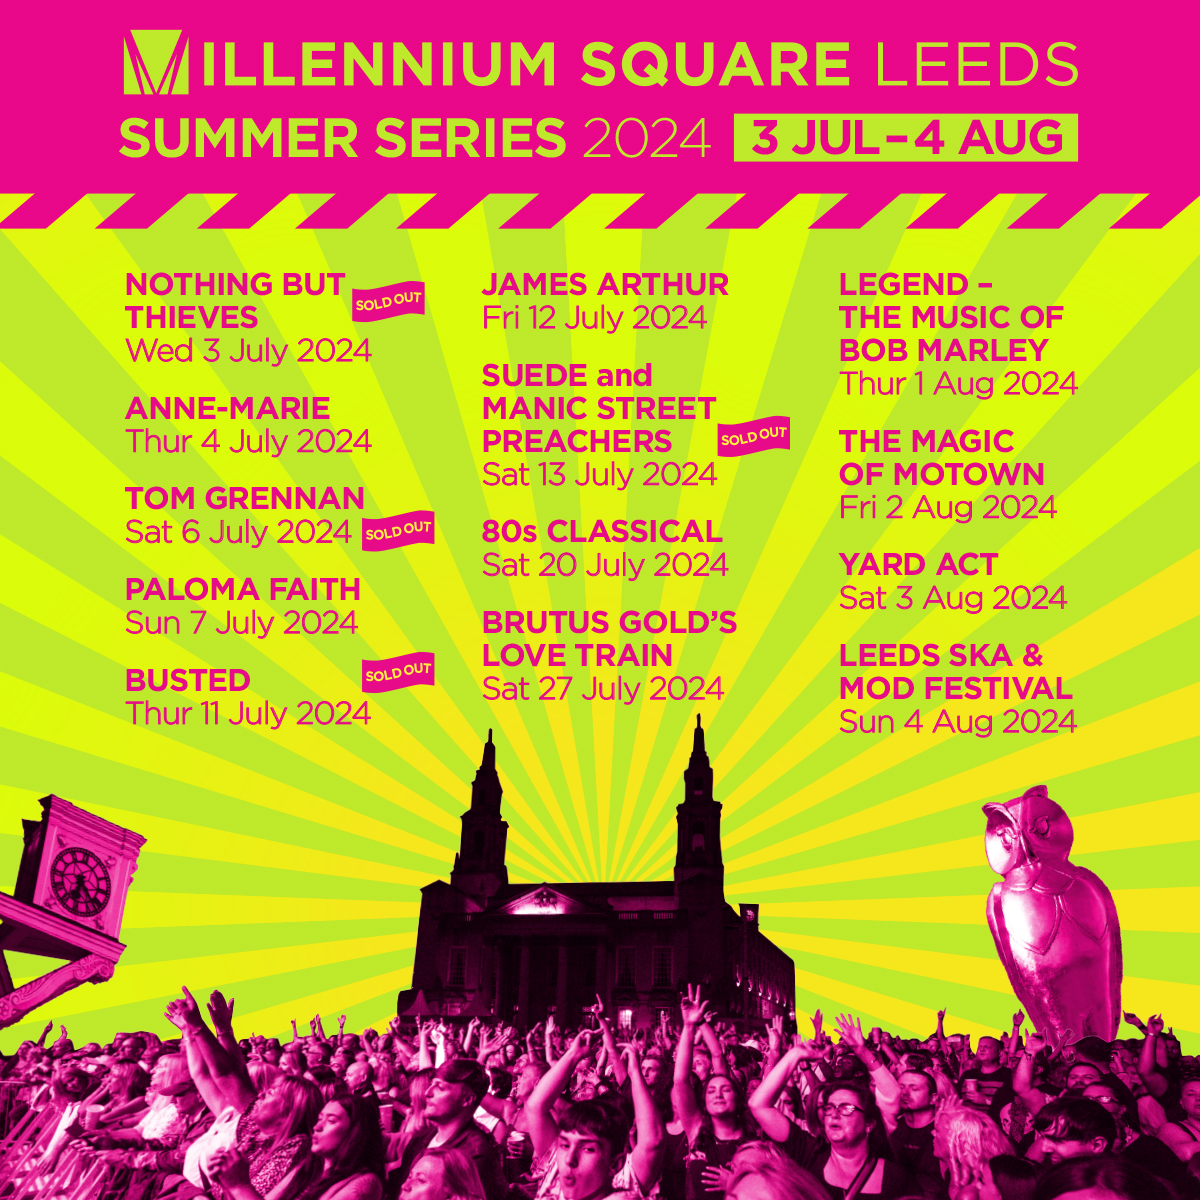 ☀ 🎶 Millennium Square’s Summer Series returns from 3 July to 4 August 2024 with 13 nights of unmissable open-air gigs ft an eclectic line-up of world-renowned icons and emerging artists. More info » bit.ly/SS24PR Tickets » bit.ly/MSQSS24 #SummerSeries24